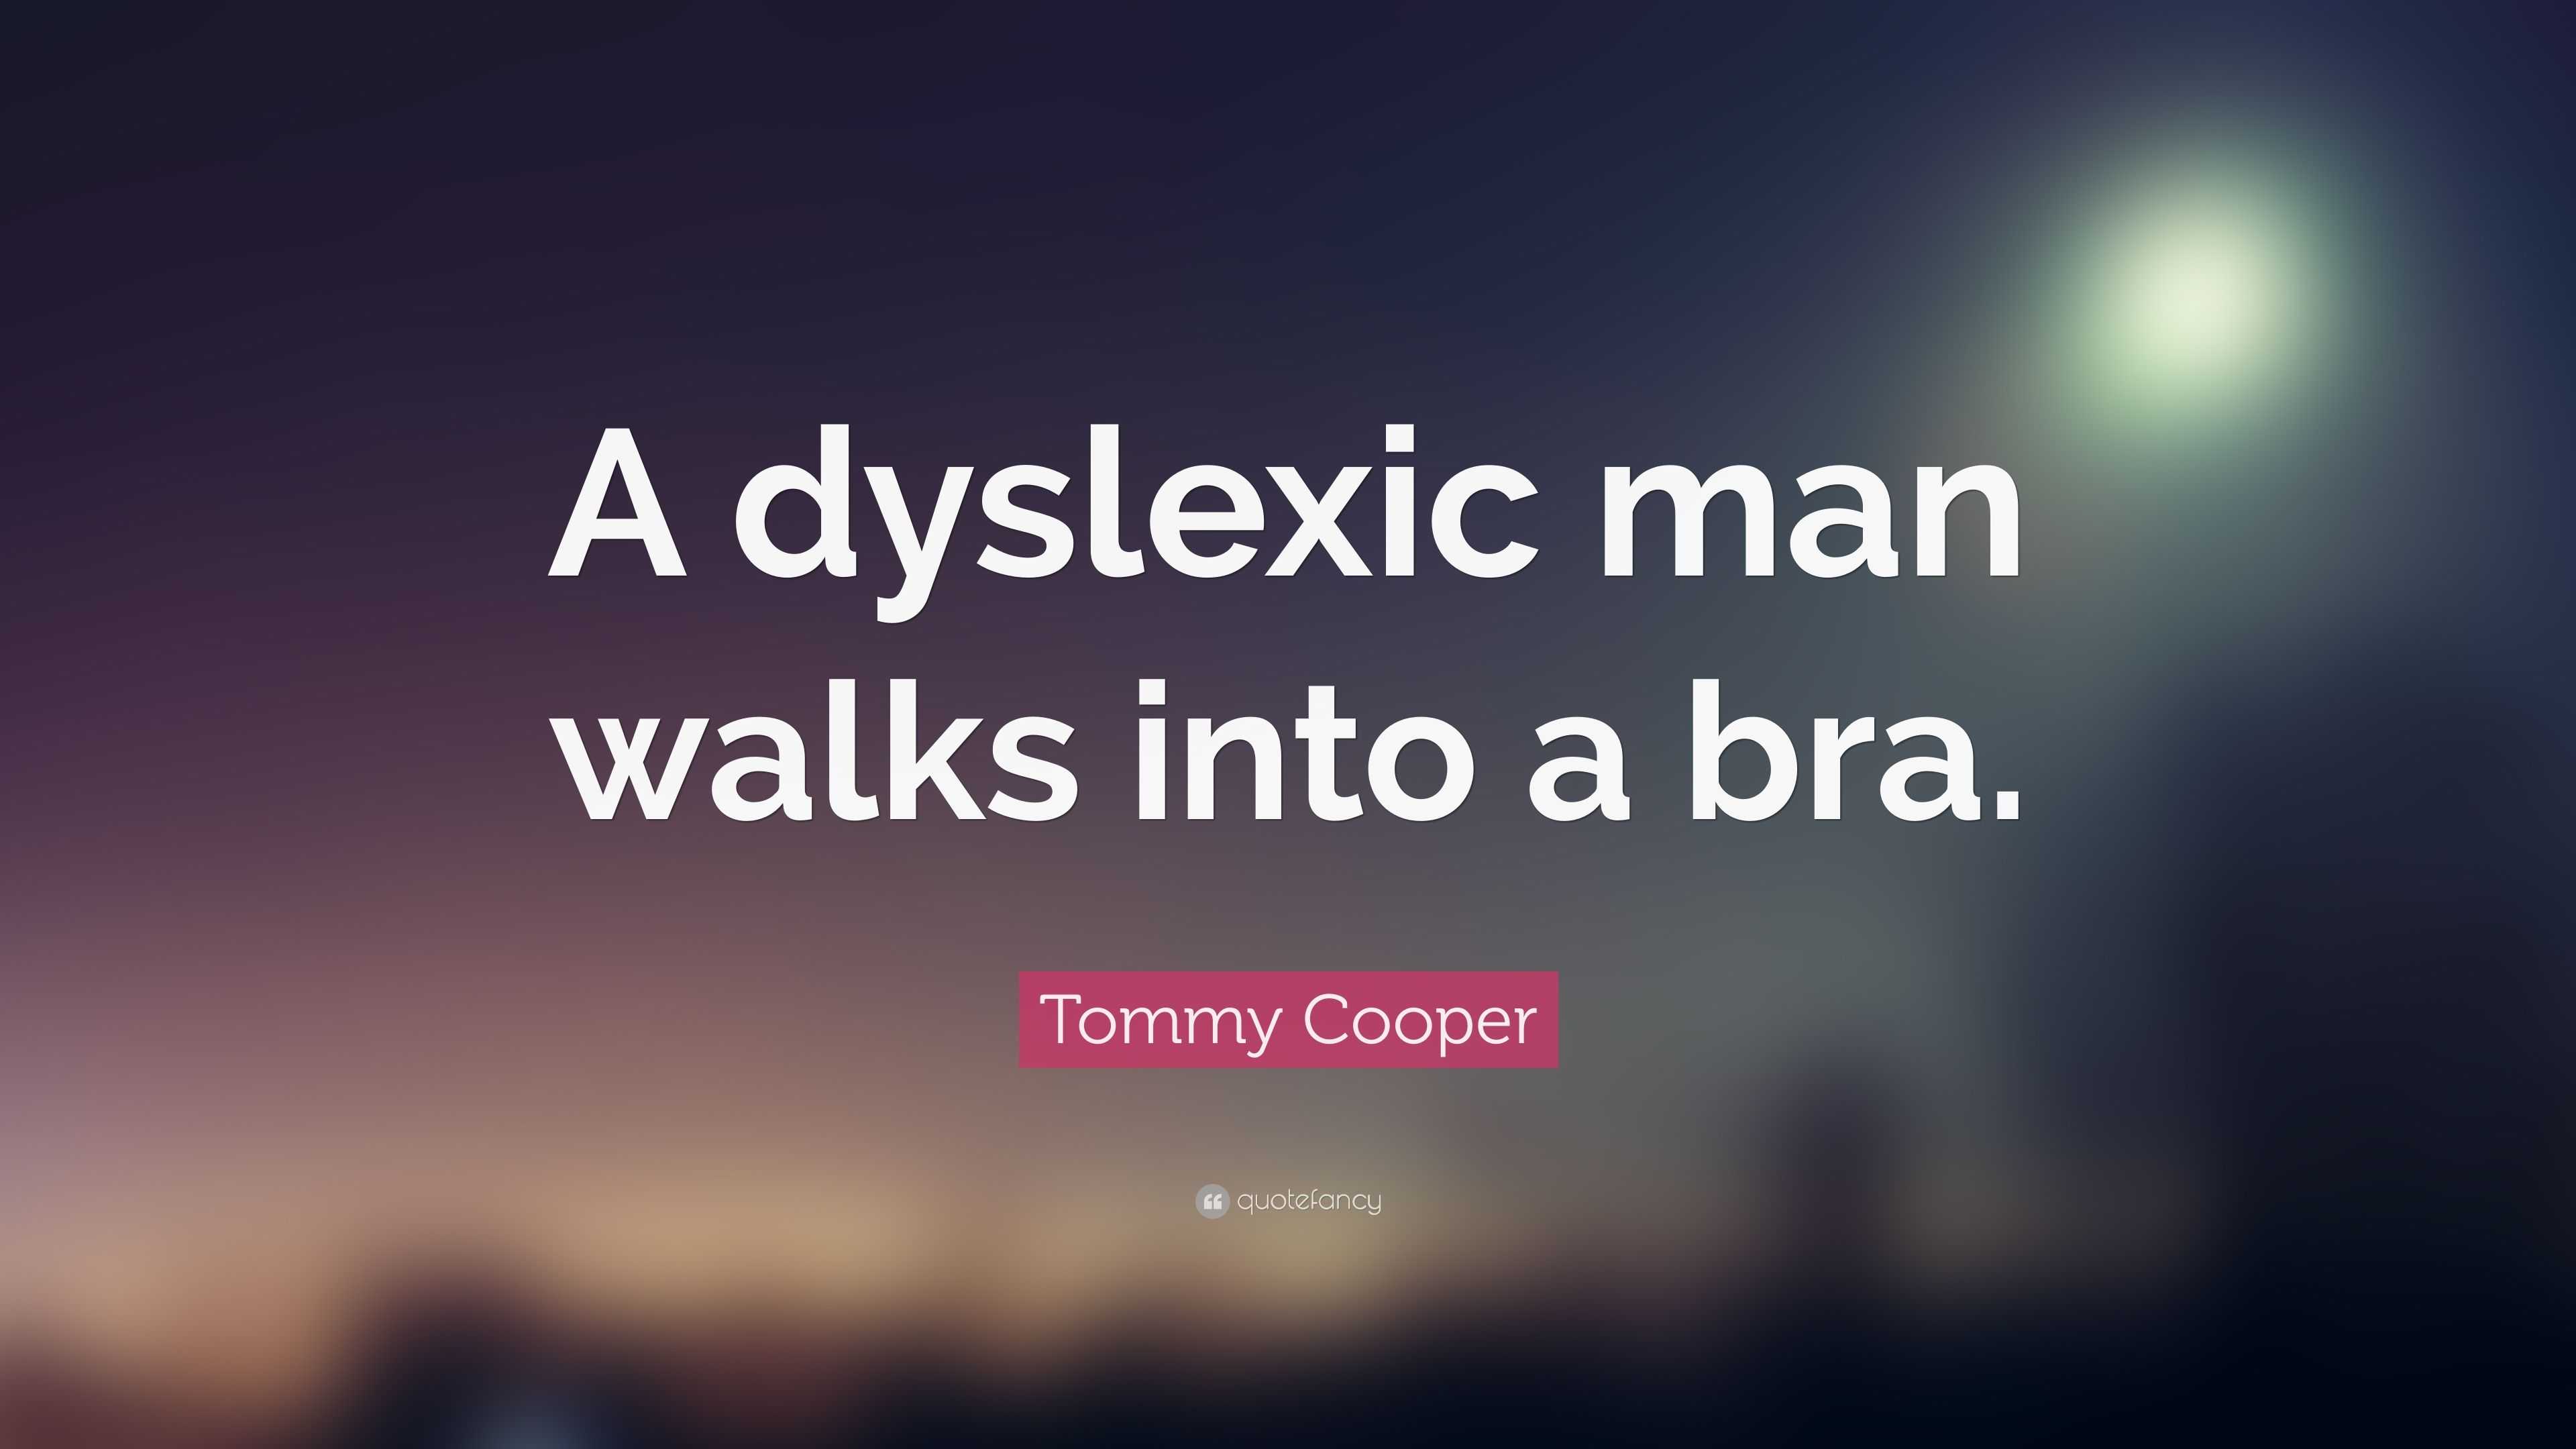 Tommy Cooper Quote: “A dyslexic man walks into a bra.”